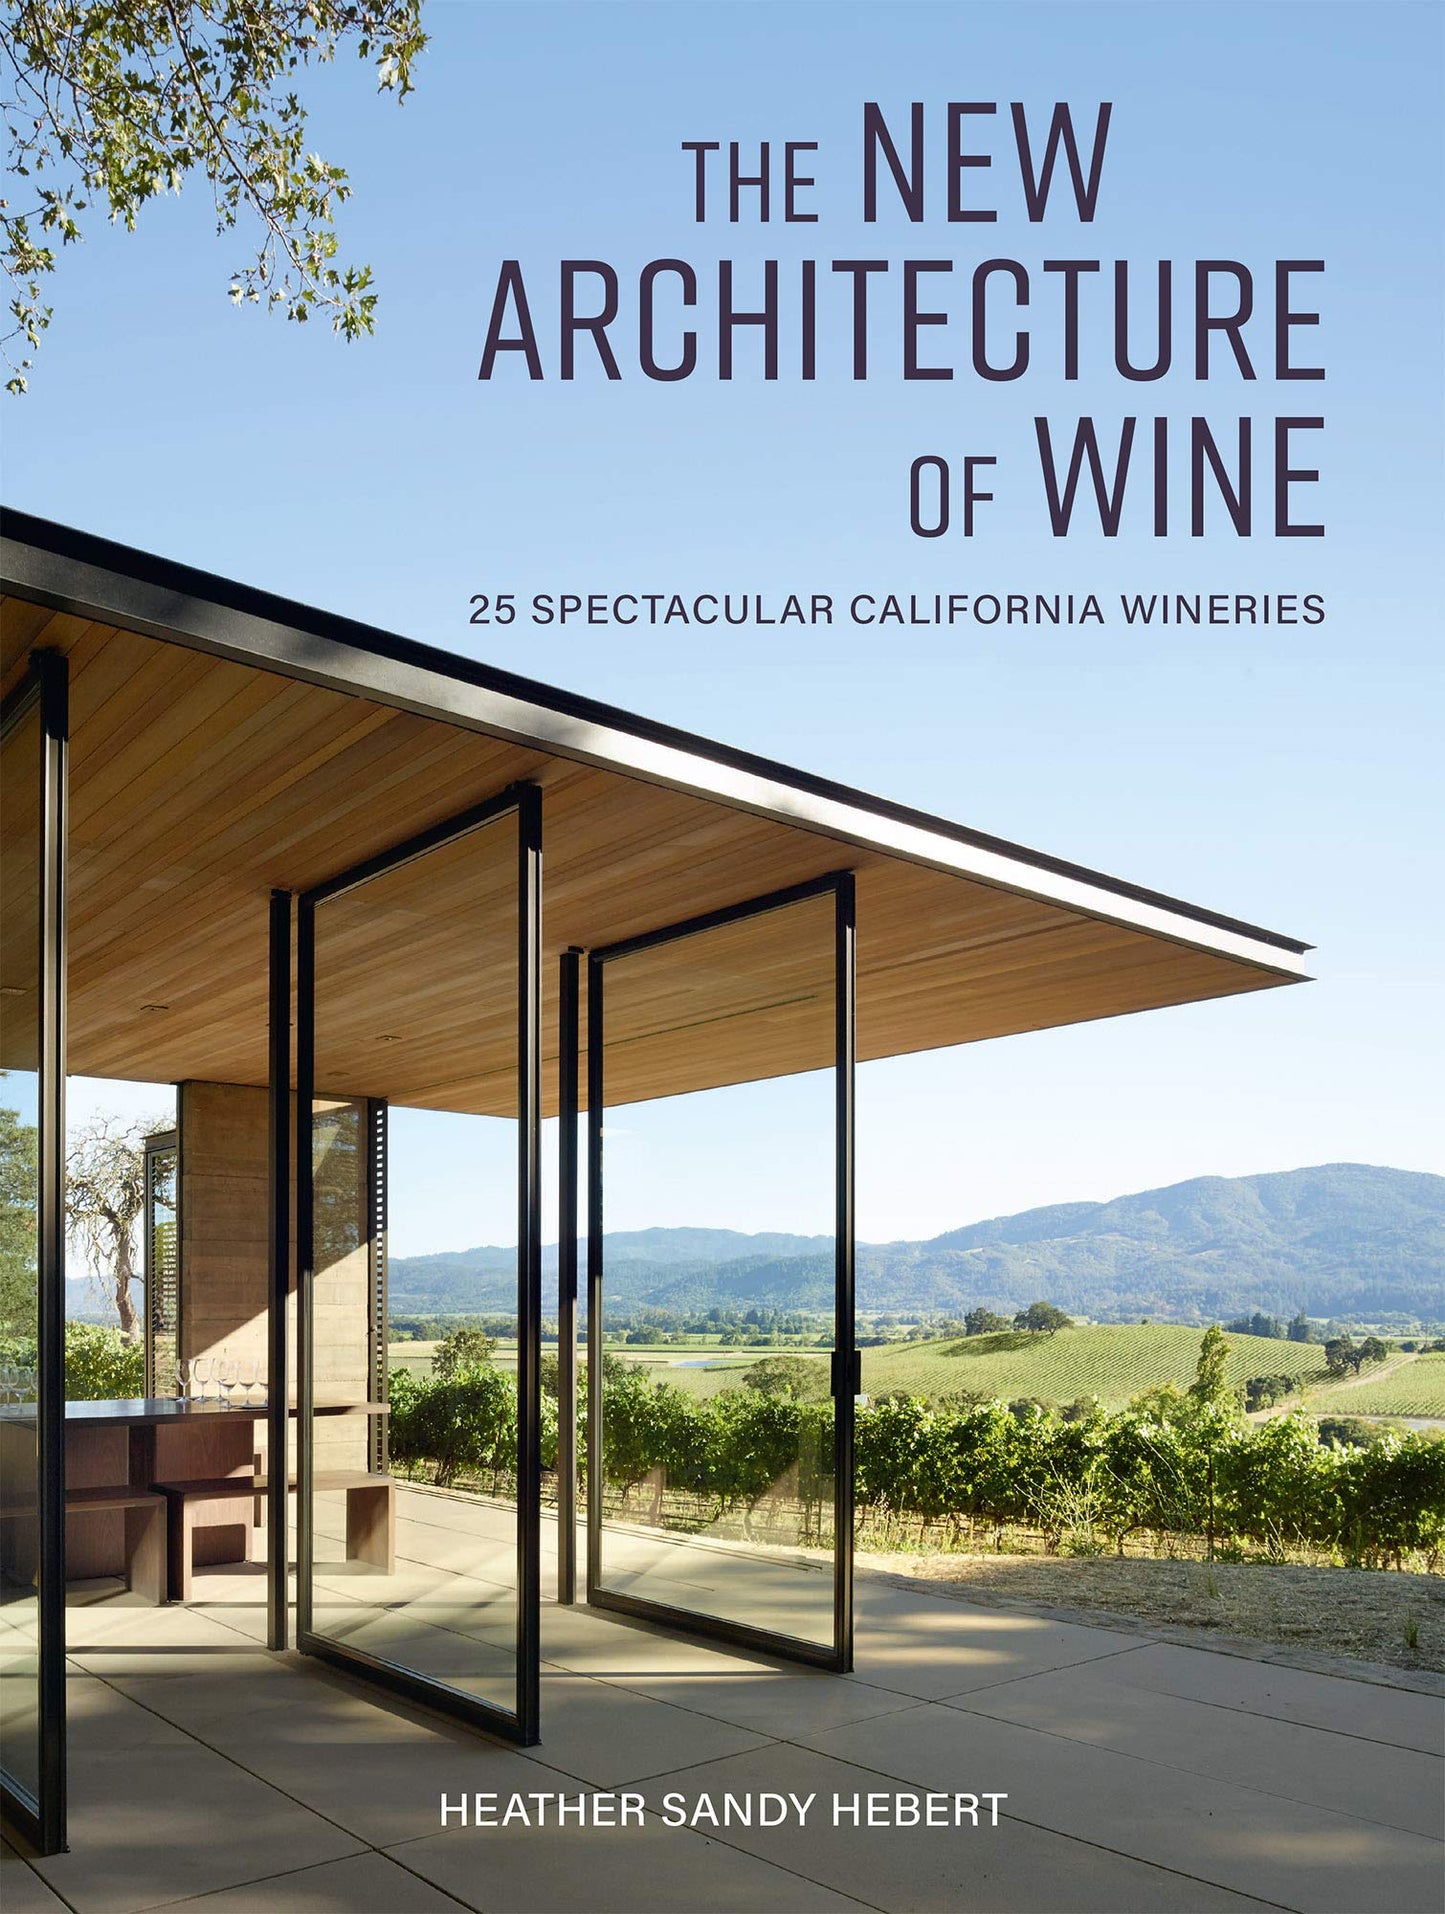 The New Architecture of Wine